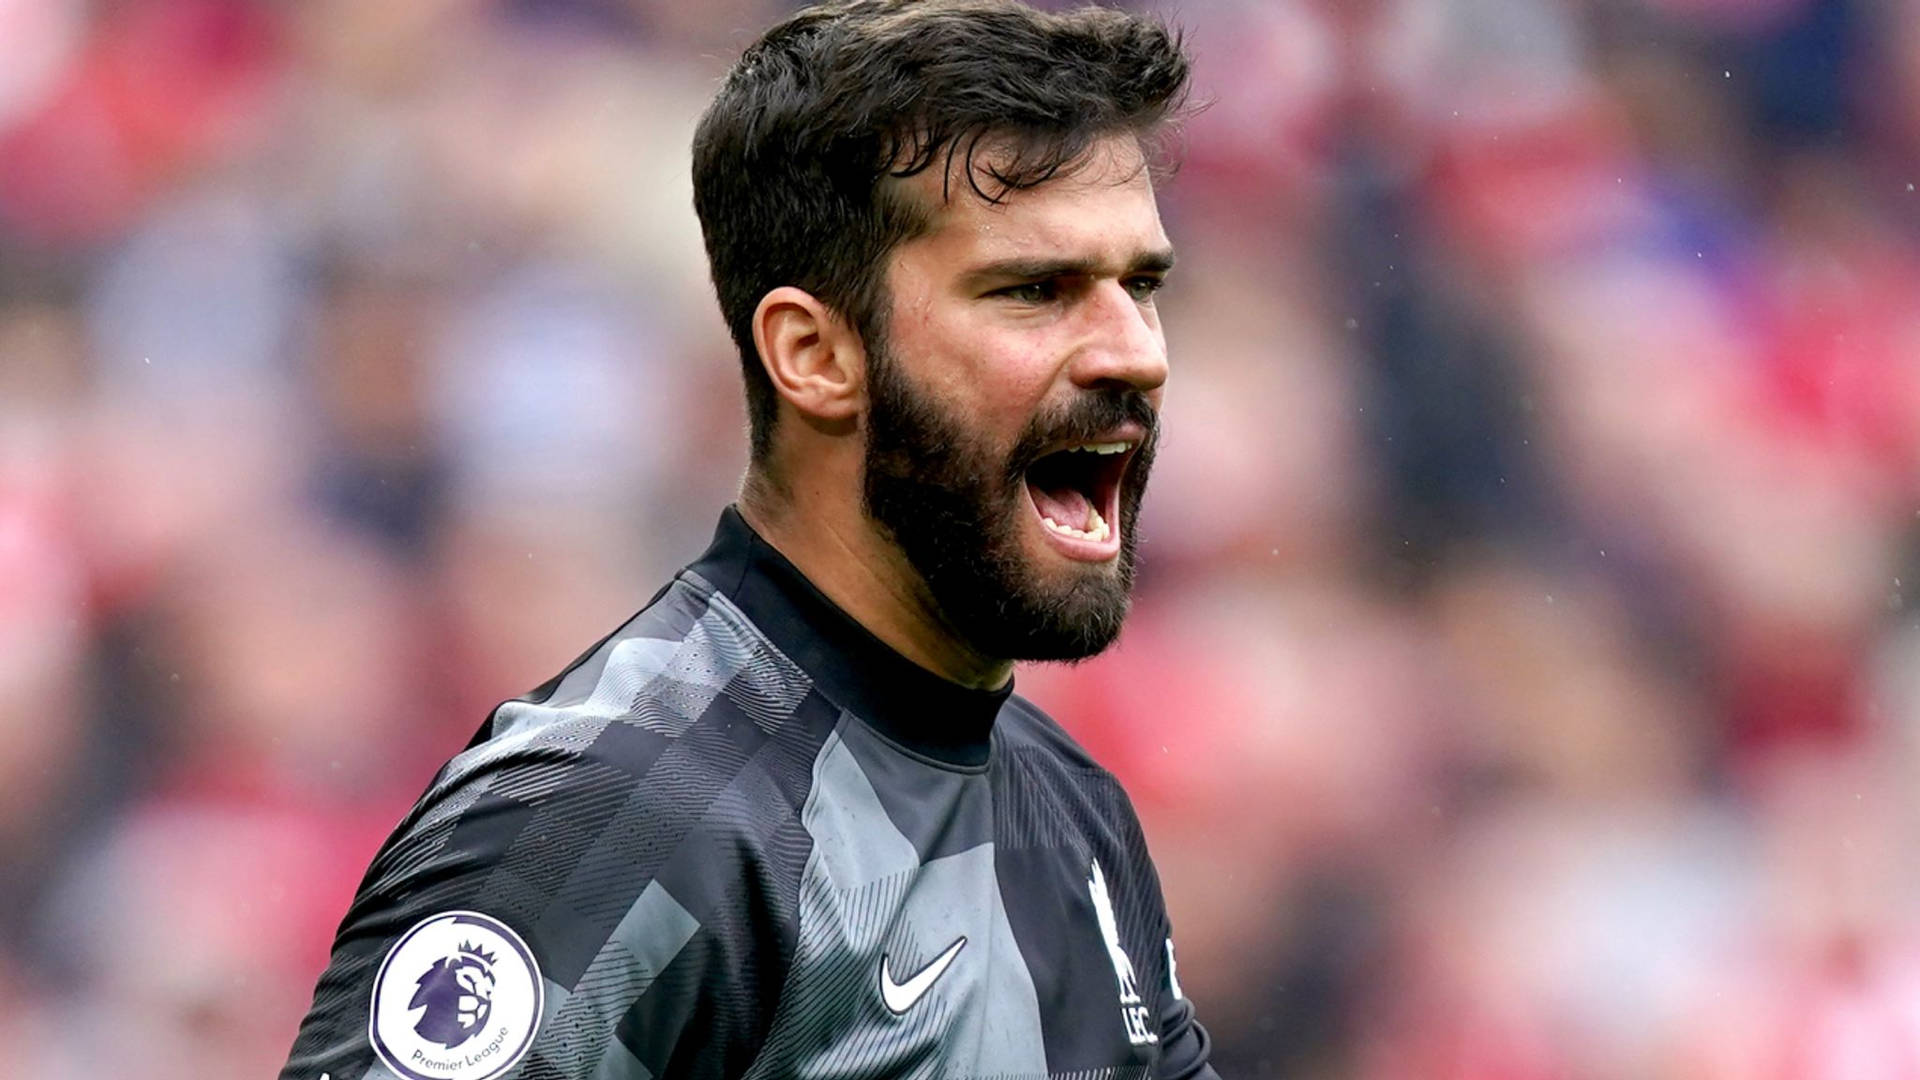 Passionate Goalkeeper Alisson Becker Expresses Intensity On the Field Wallpaper